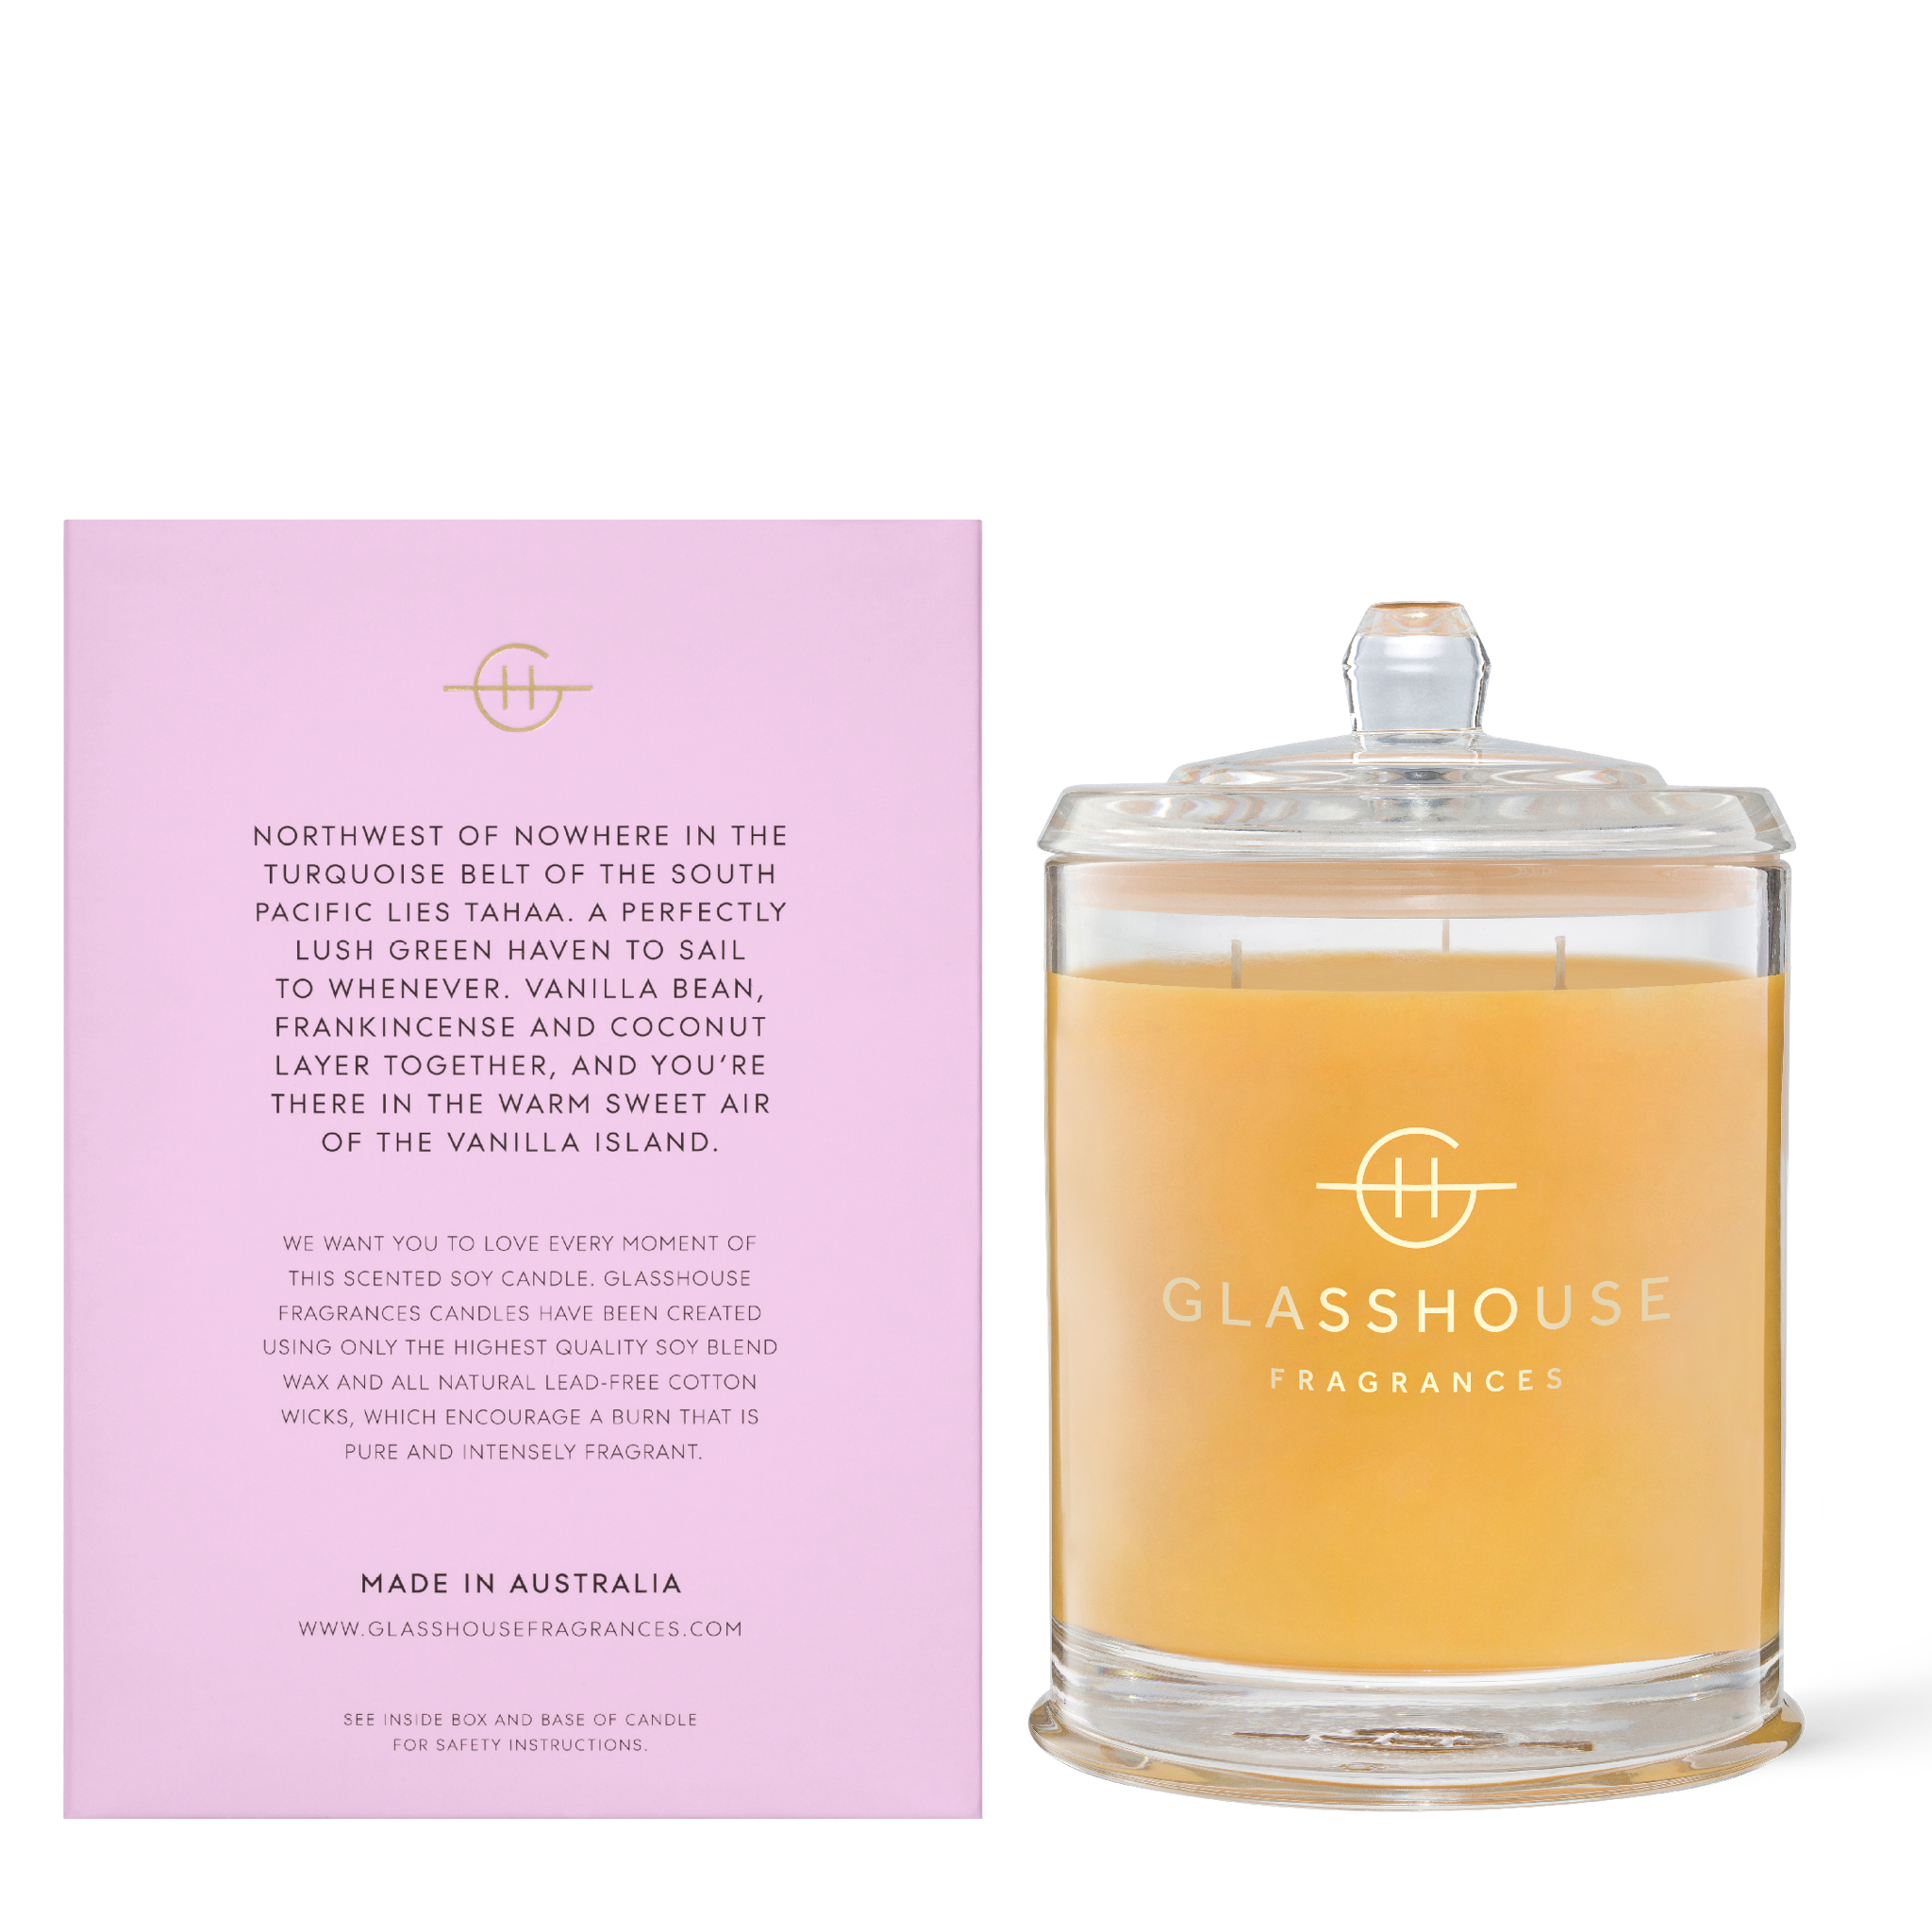 Glasshouse Fragrances A Tahaa Affair Vanilla Caramel  Soy Candle with box - Back of product shot